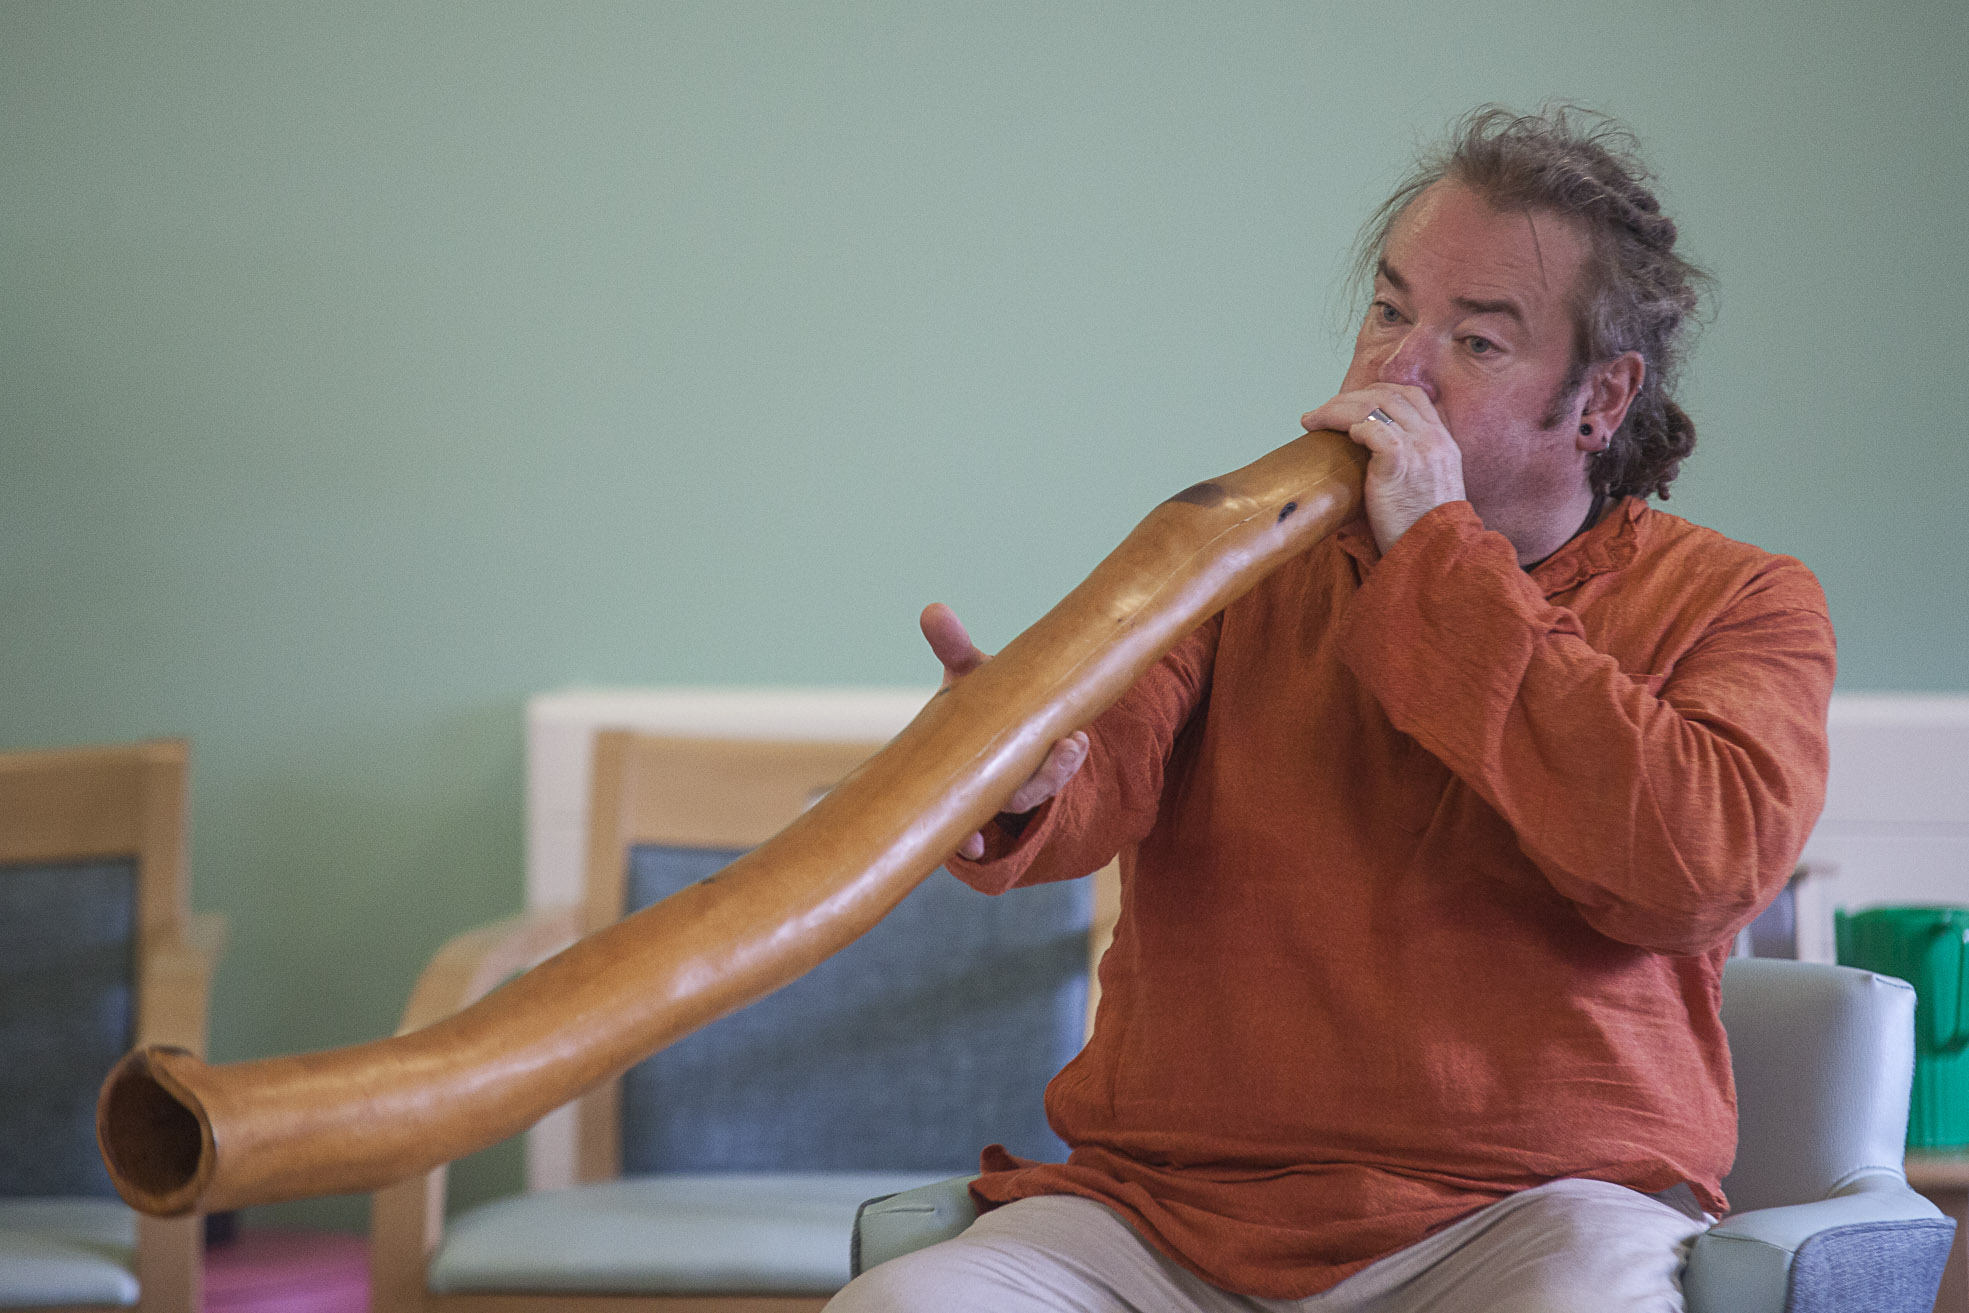 Sound of the Aussie outback enchants care home residents